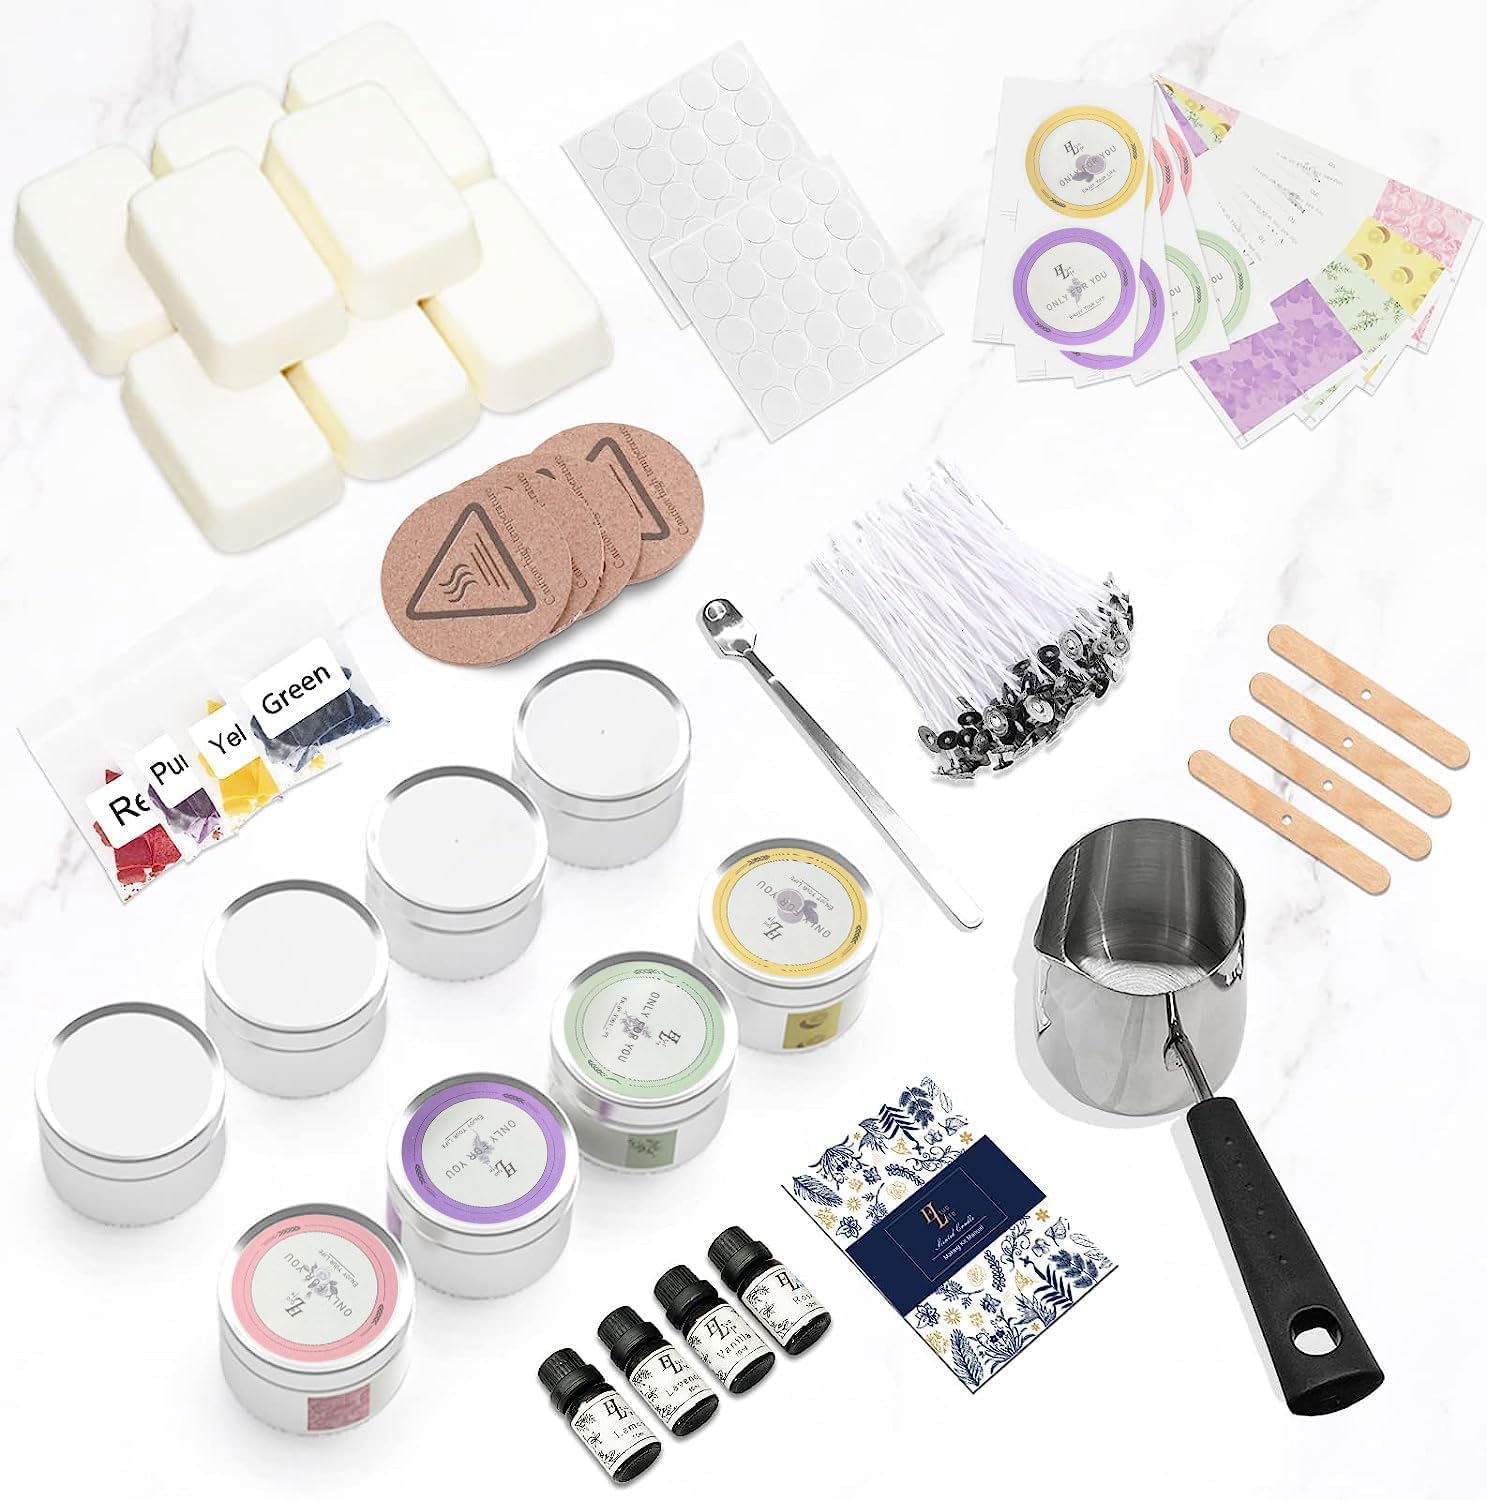 Candle Making Kit,Complete Candle Making Kits for Adults Kids,DIY Scented Candle Making Supplies Include Soy Wax for Candle Making,Scent Oils Wicks Dyes Candle Jars Melting Pot,Arts and Crafts Kits - image 2 of 9